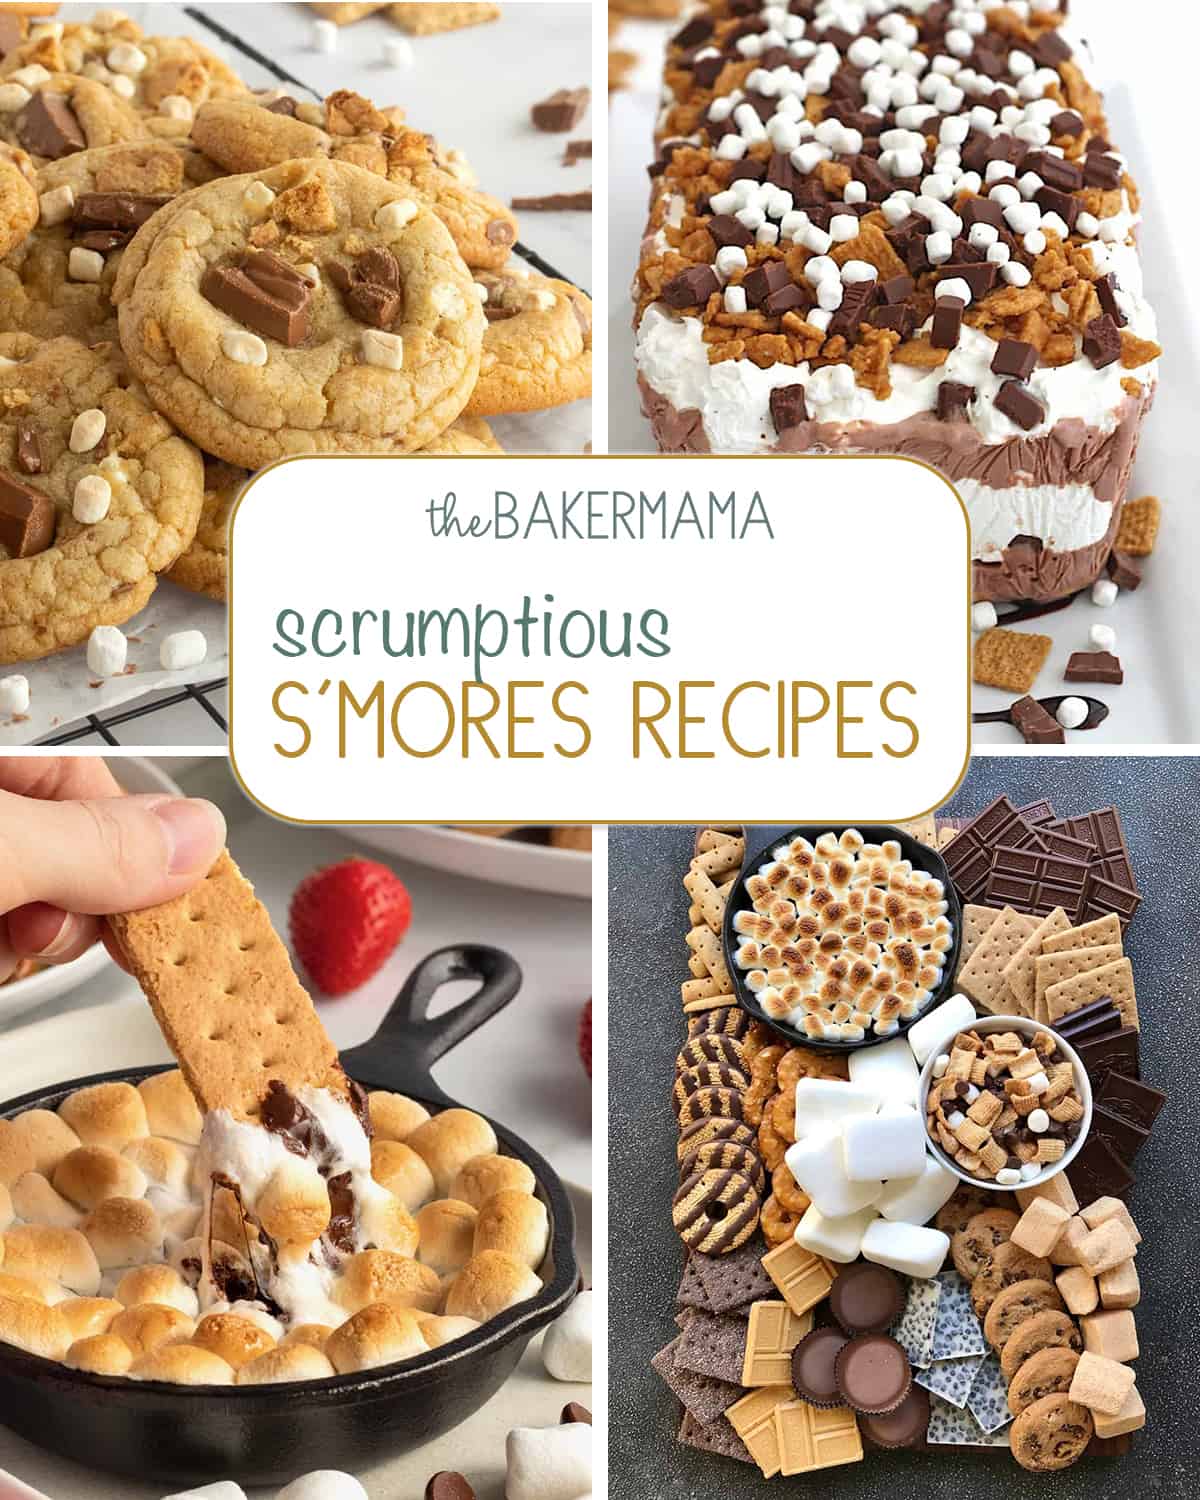 Four s'mores recipes including S'mores Pudding Cookies, S'mores Ice Cream Cake, S'mores Dip, and a S'mores board.